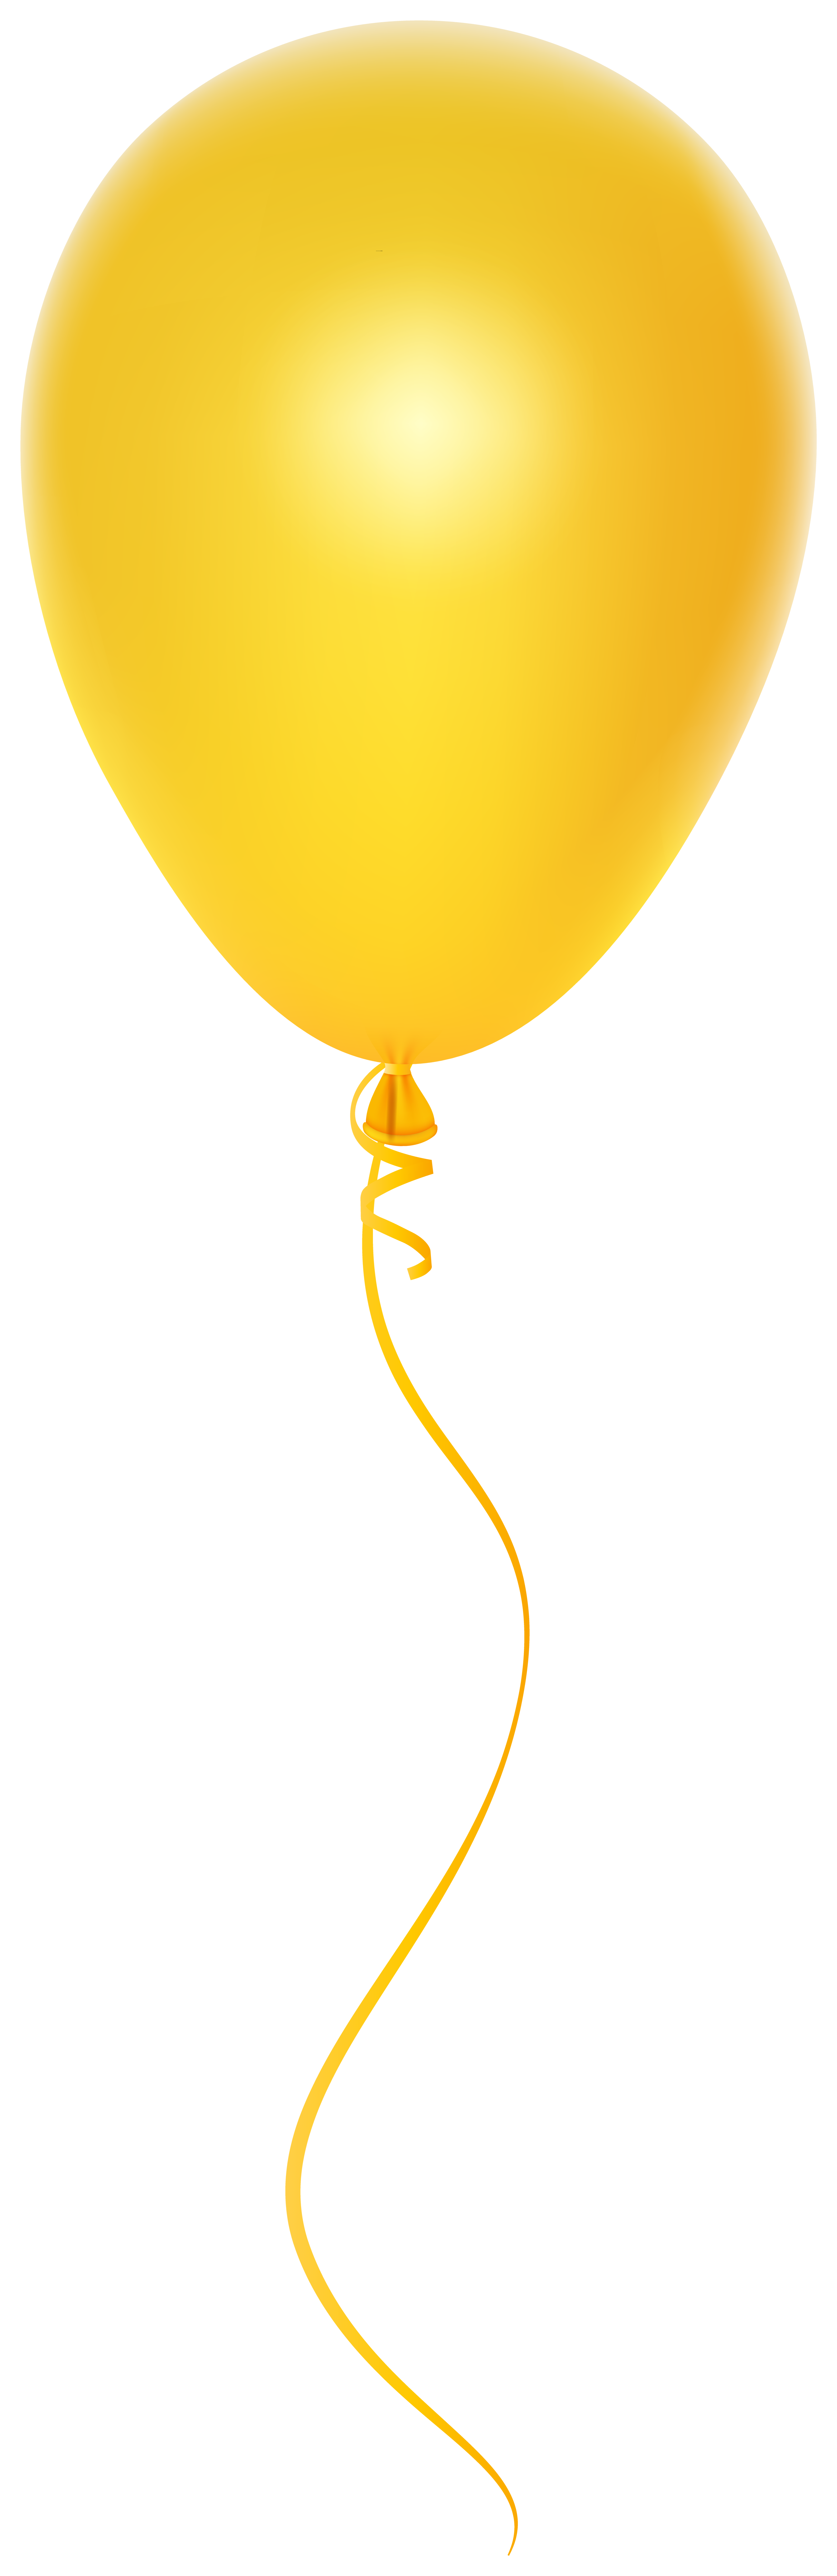 Yellow Balloon Png Clipart Gallery Yopriceville High Quality Images And Transparent Png Free Clipart